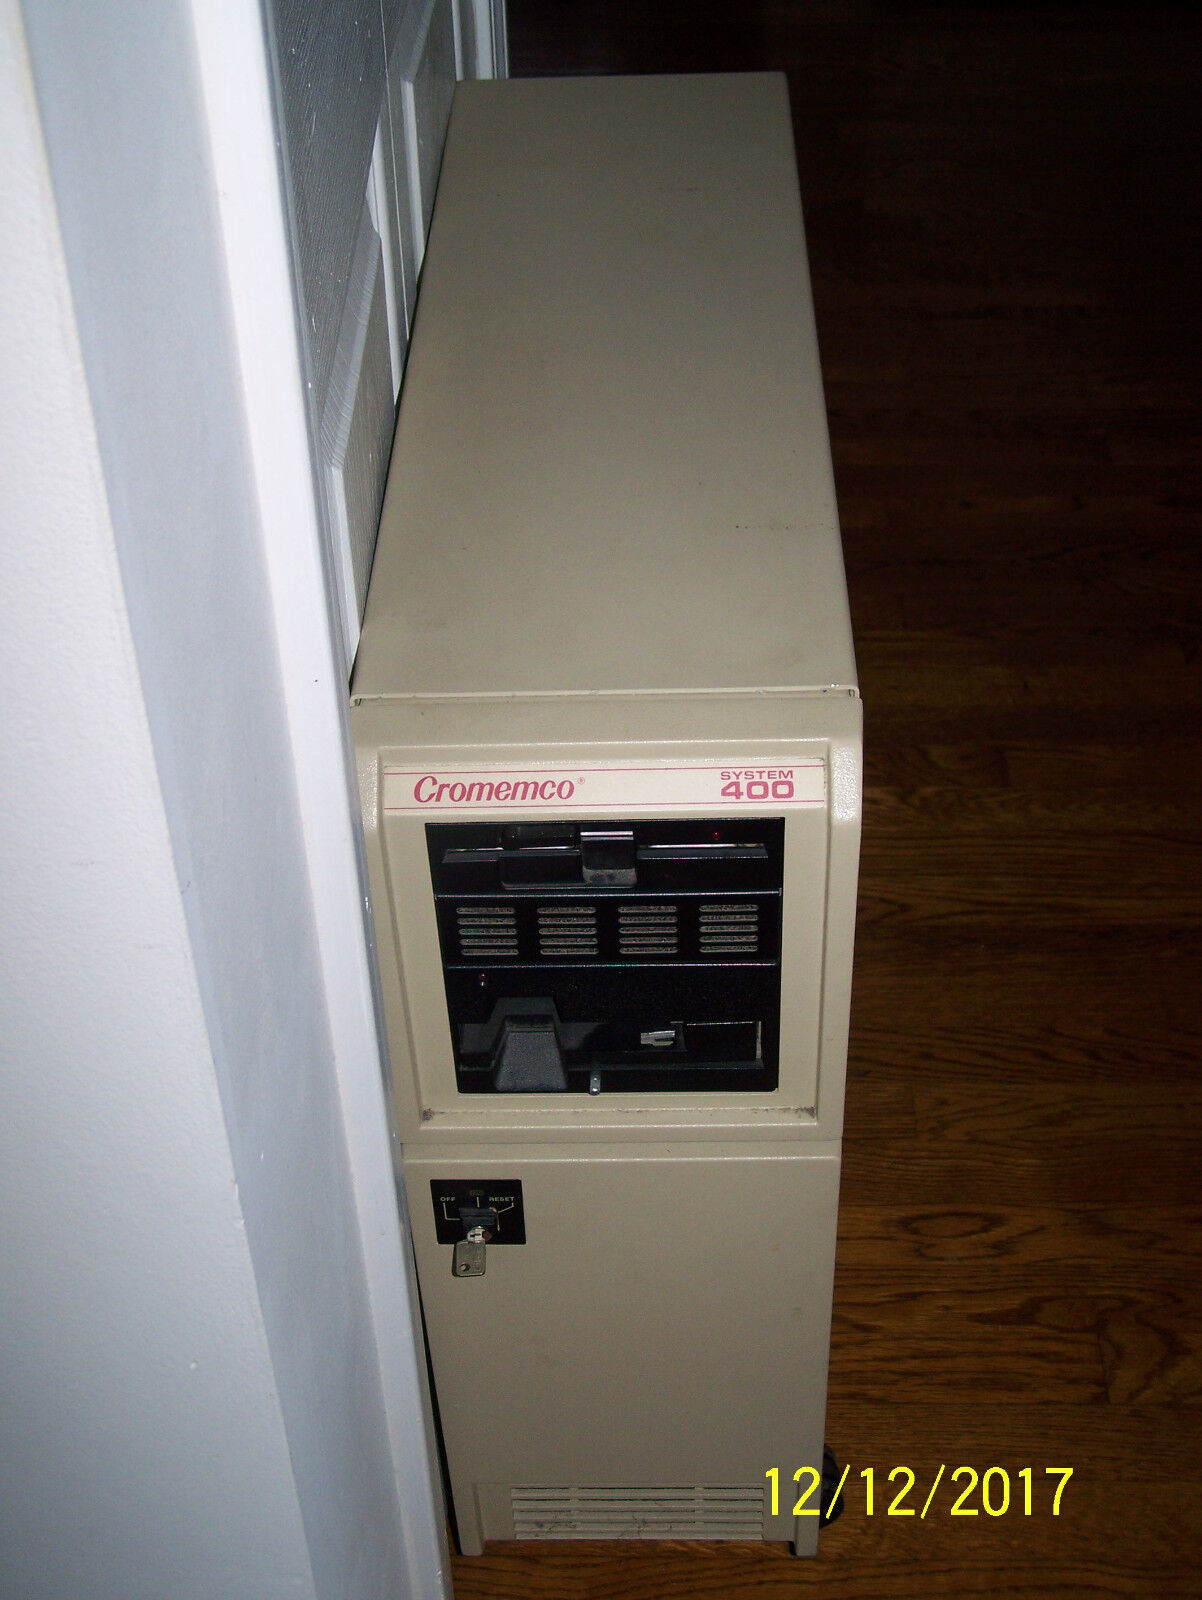 RARE Vintage  Cromemco System 400 mainframe Computer  WORKING  1 of a kind